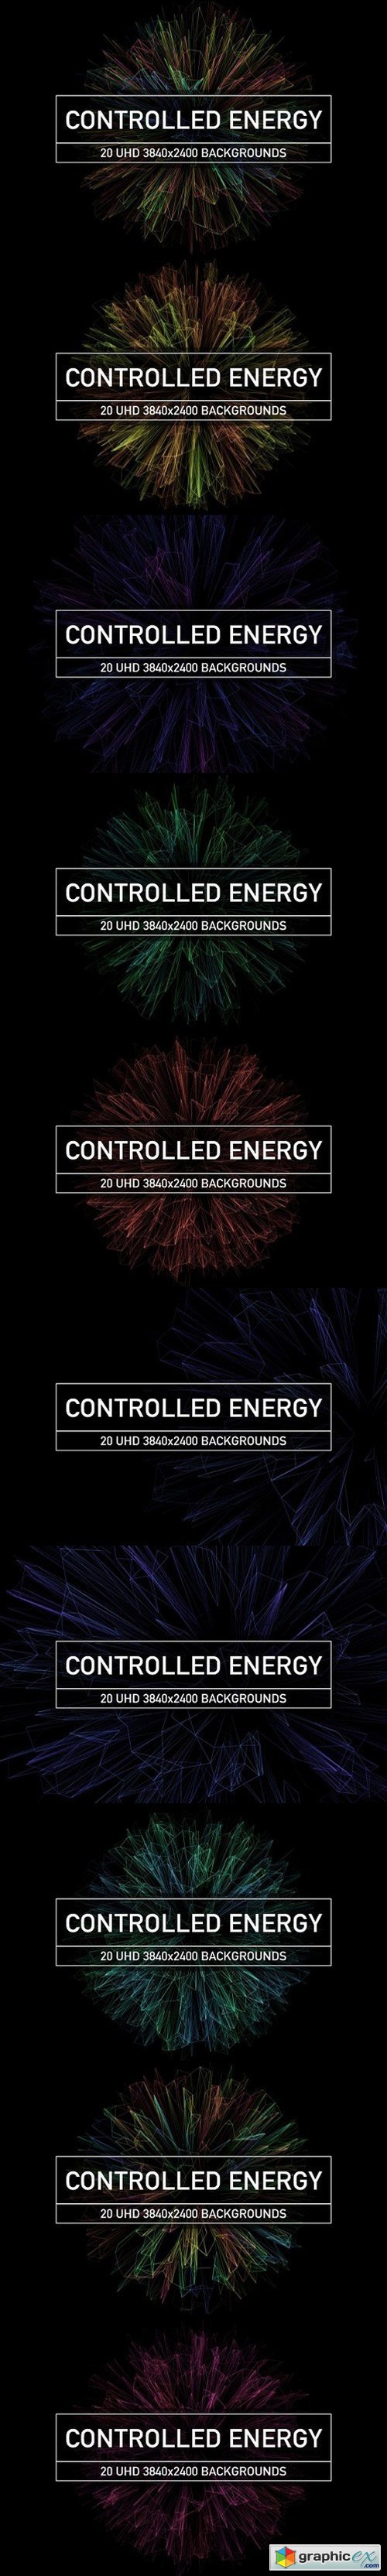 Controlled Energy Backgrounds Set